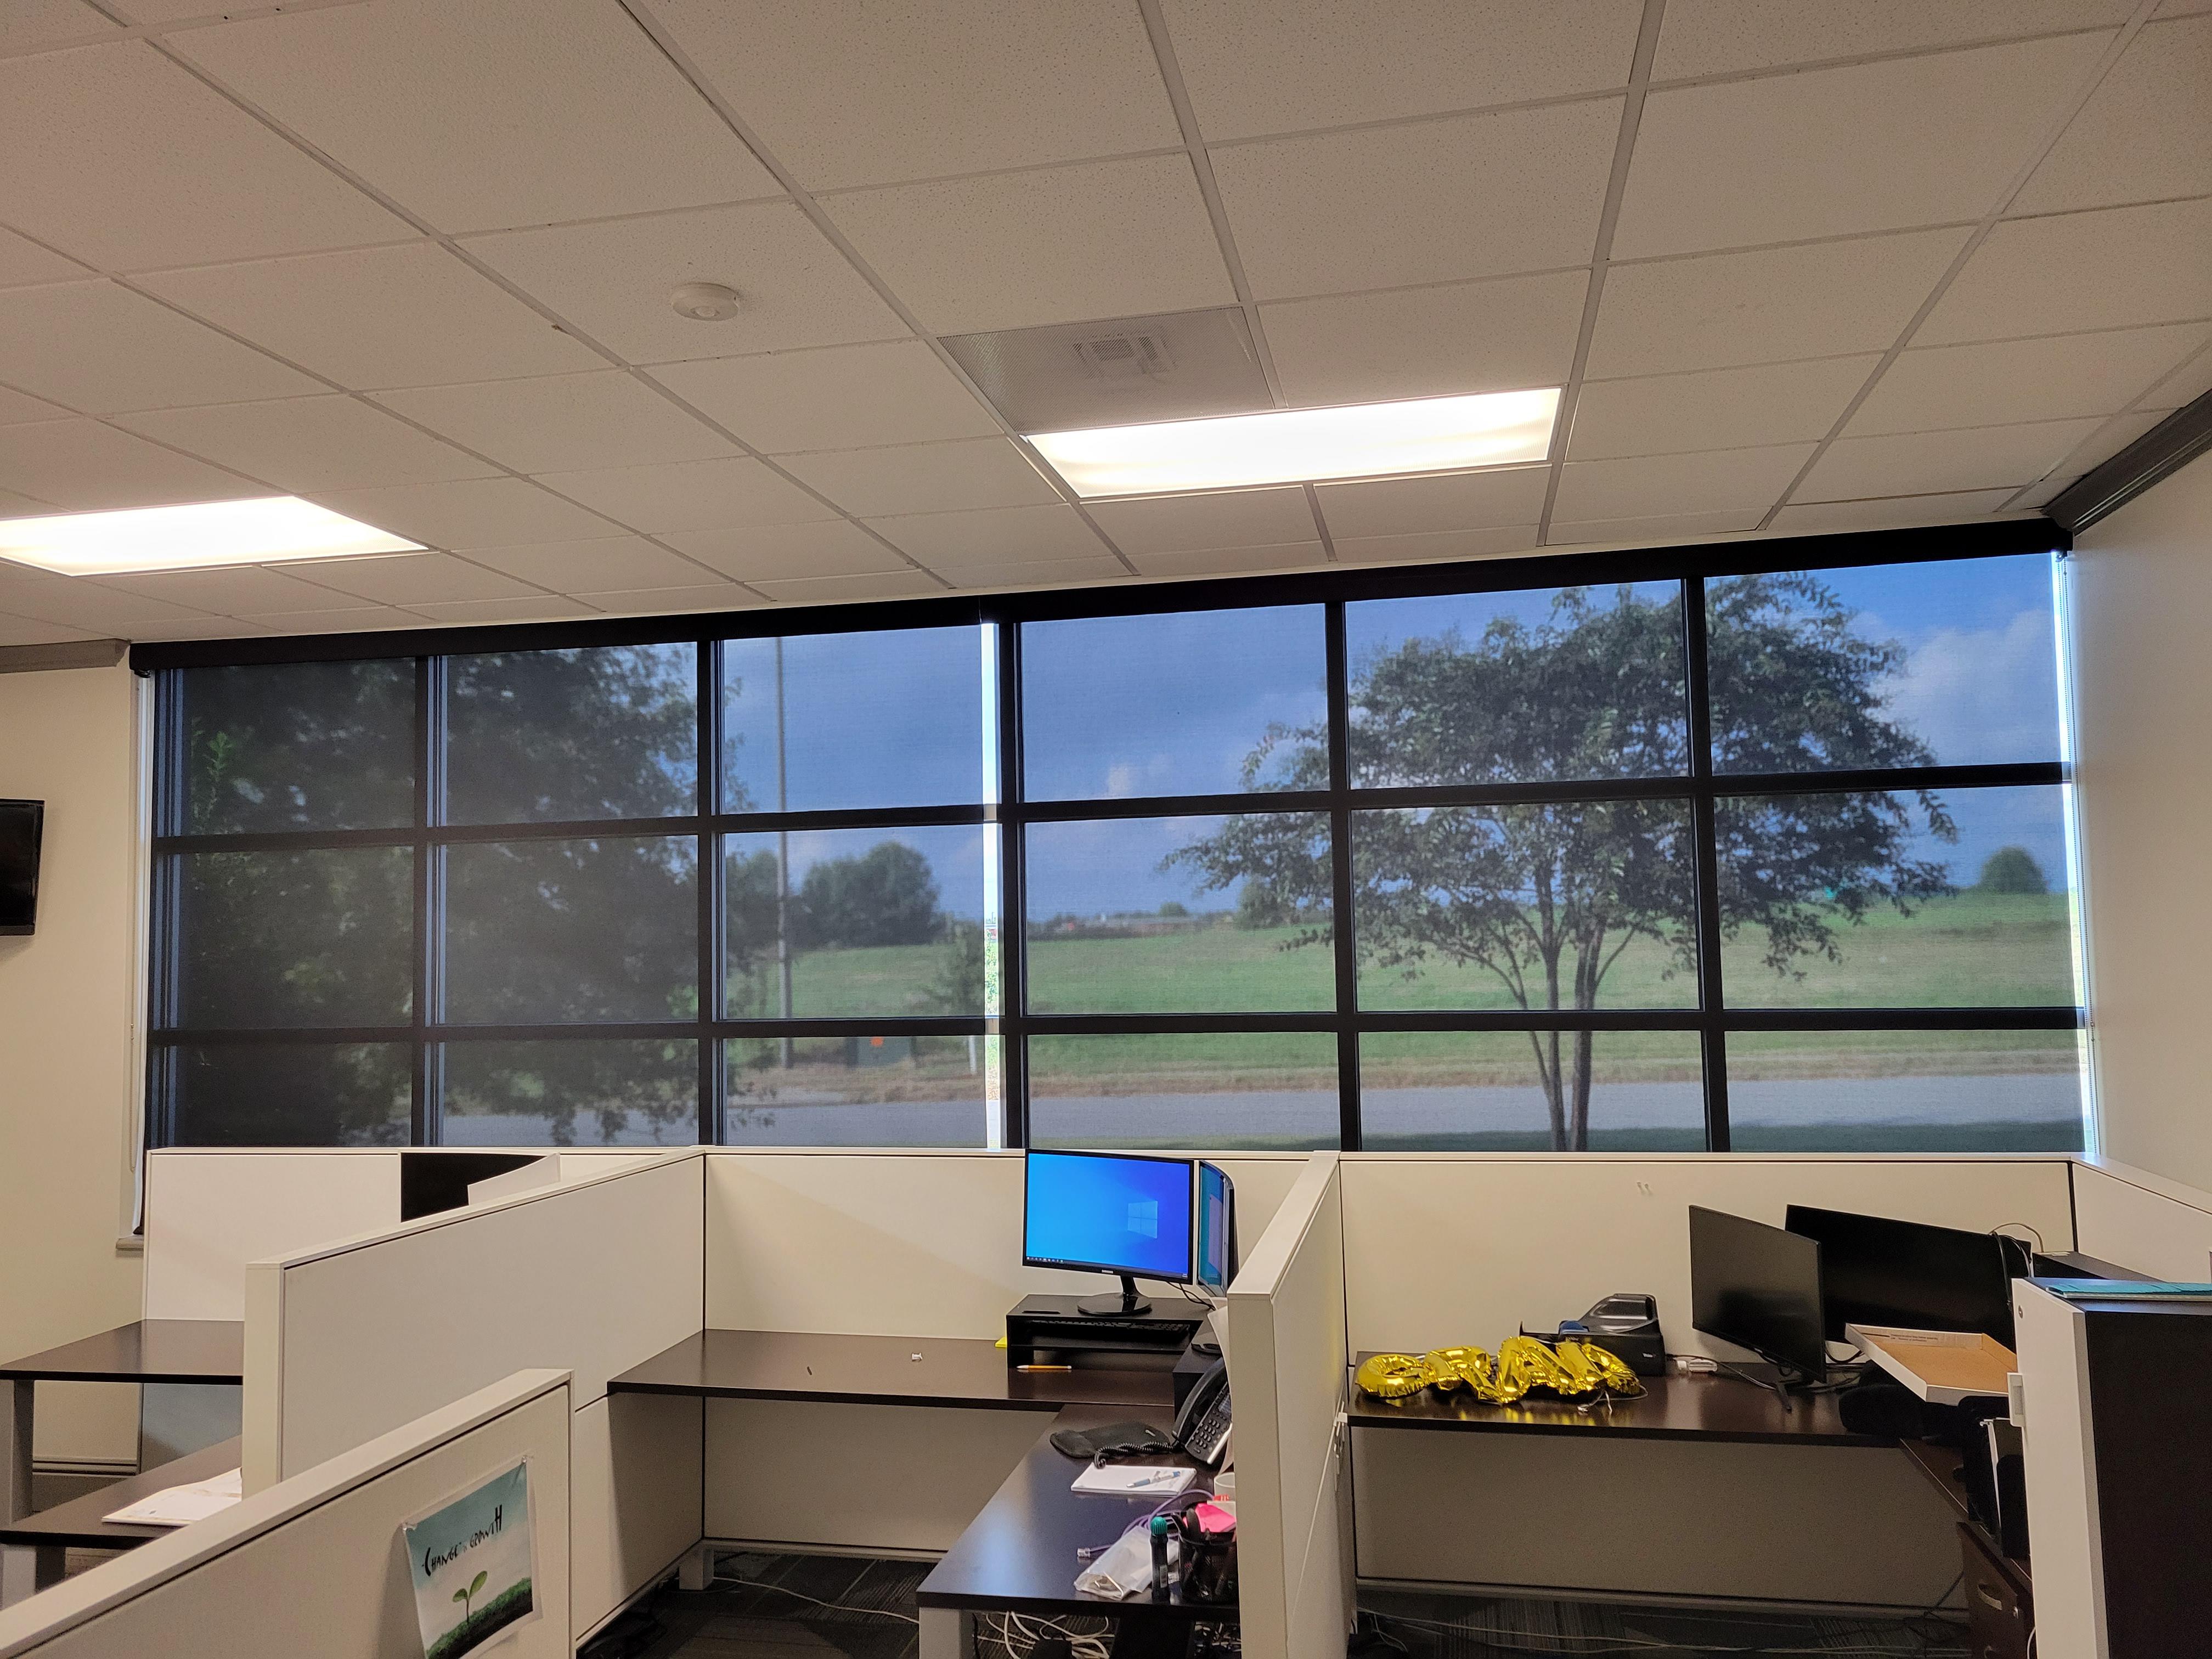 Solar Shades - great option for glare, heat control while allowing you the outside view!